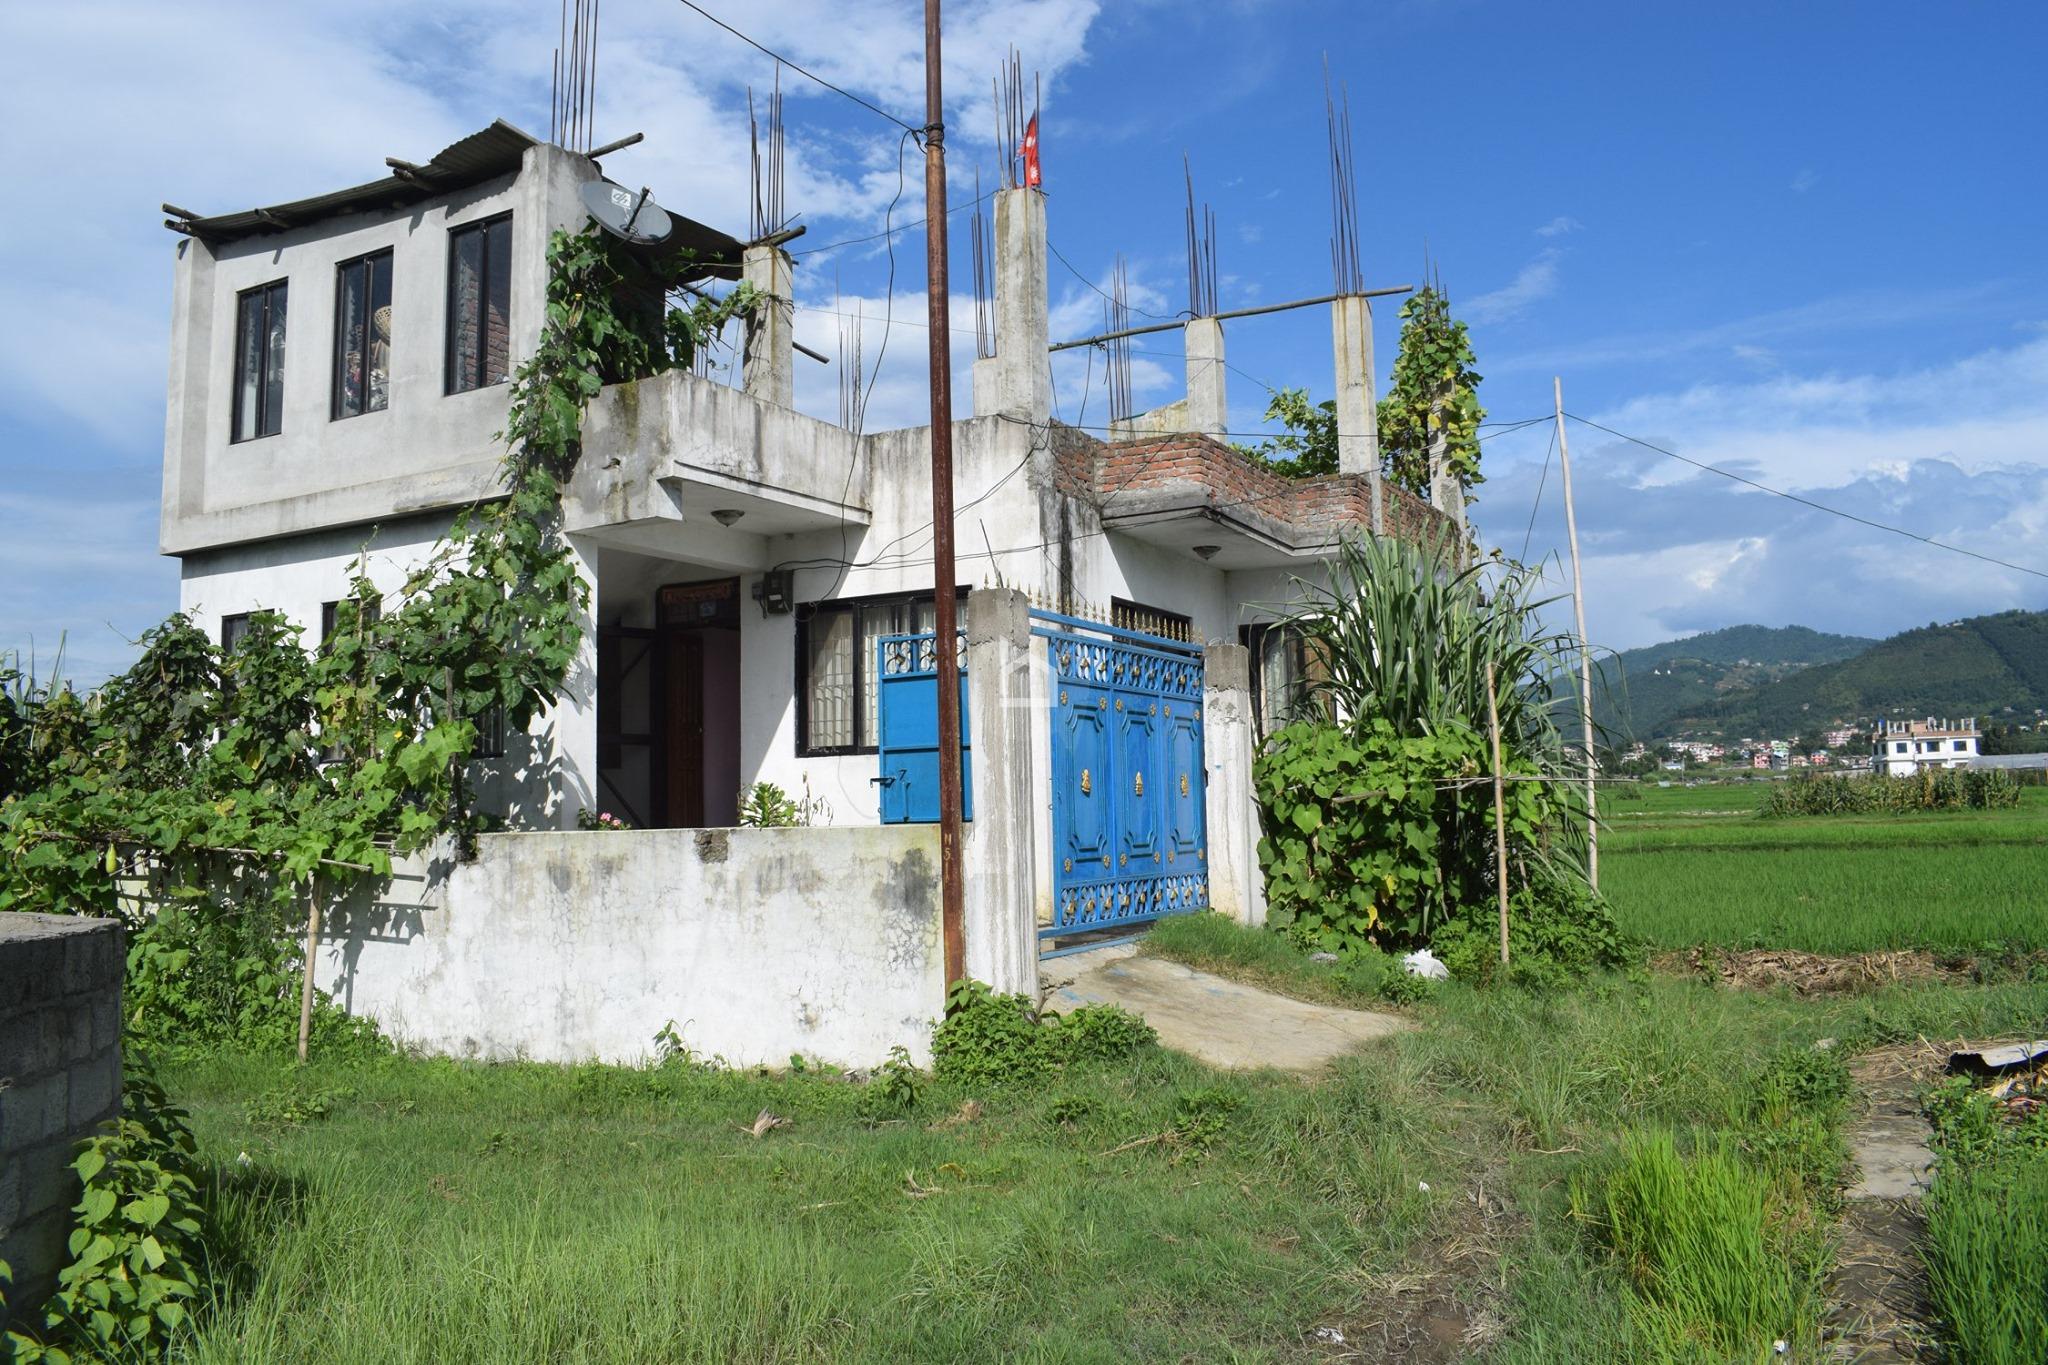 SOLD OUT : House for Sale in Dadikot, Bhaktapur Thumbnail